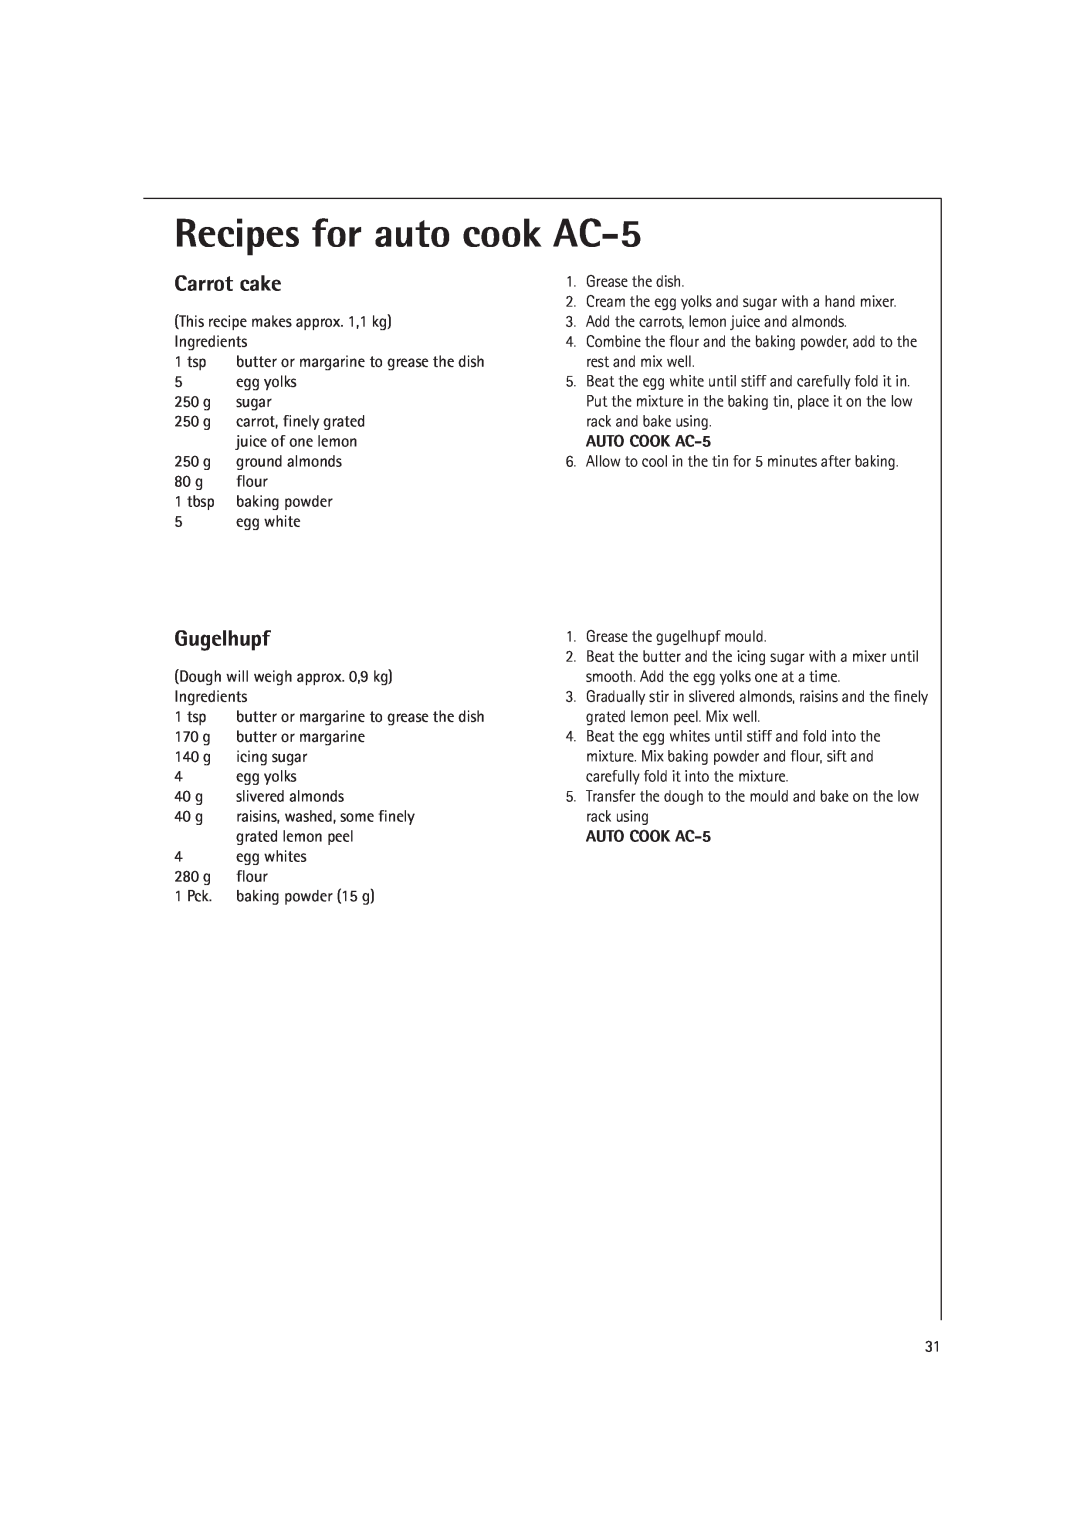 Electrolux MCC4060E operating instructions Recipes for auto cook AC-5, Carrot cake, Gugelhupf, AUTO COOK AC-5 